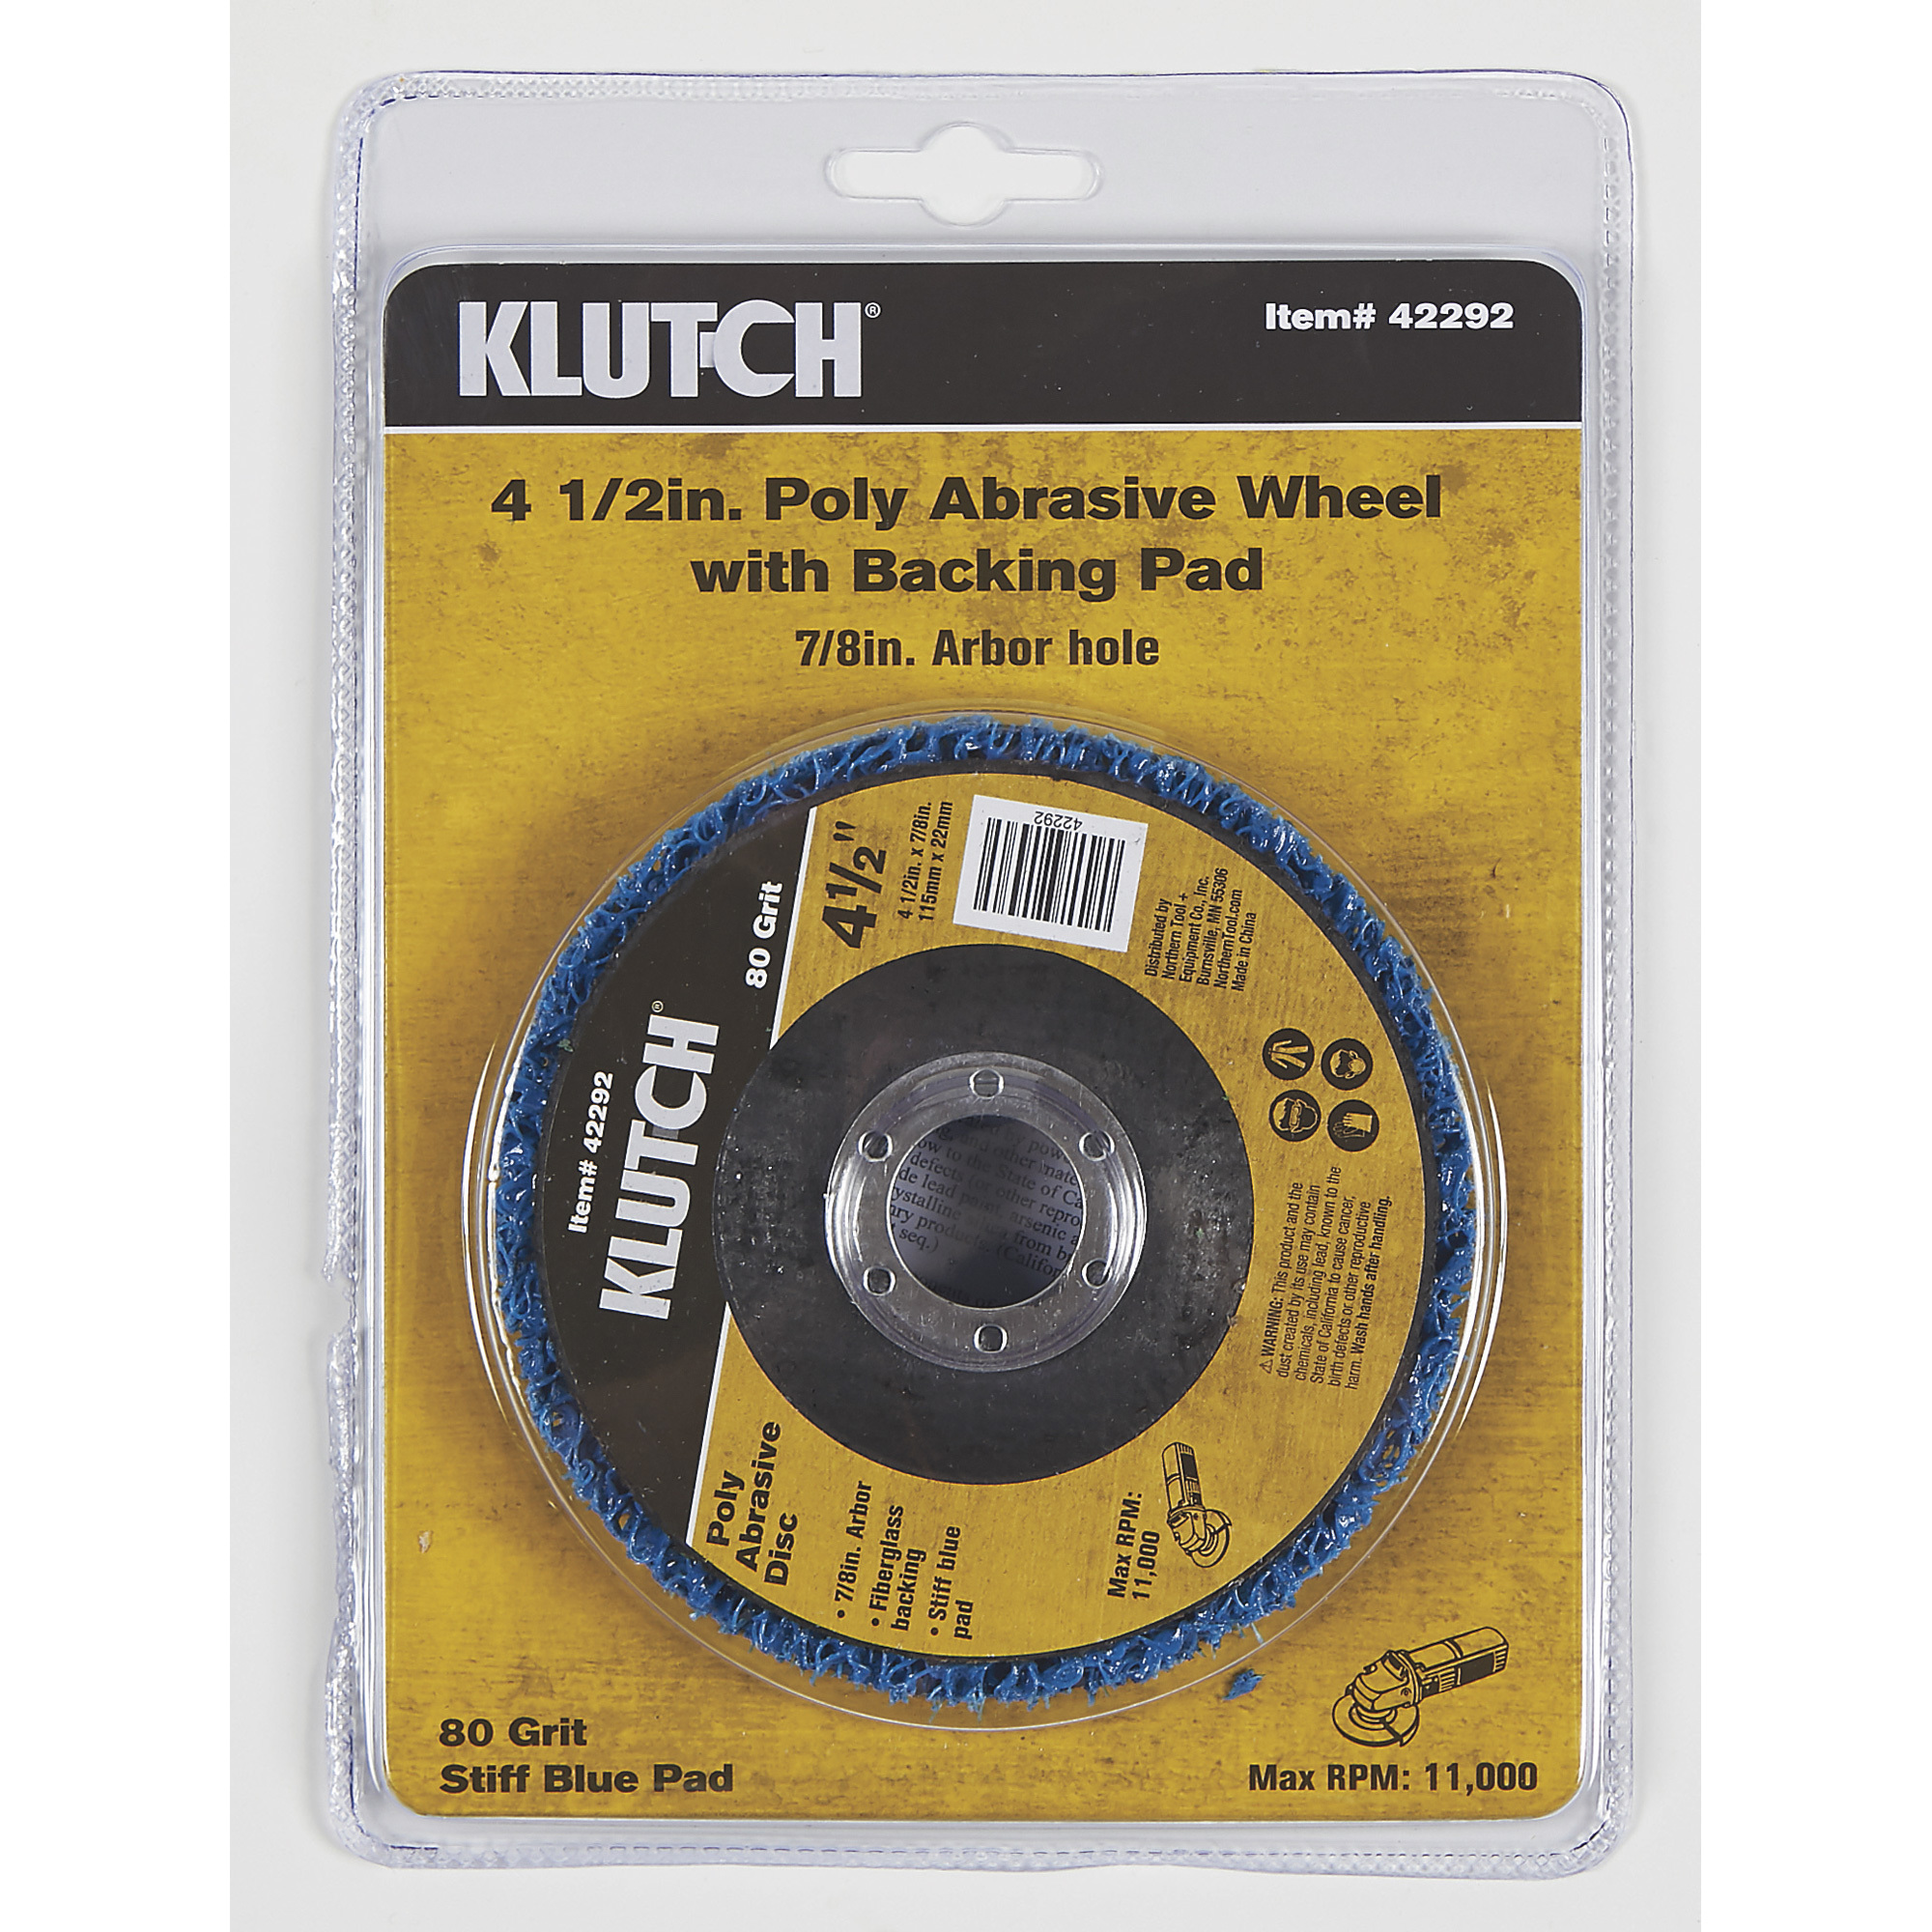 Klutch 4 1/2Inch Poly Abrasive Disc, 80 Grit, 7/8Inch Arbor Hole